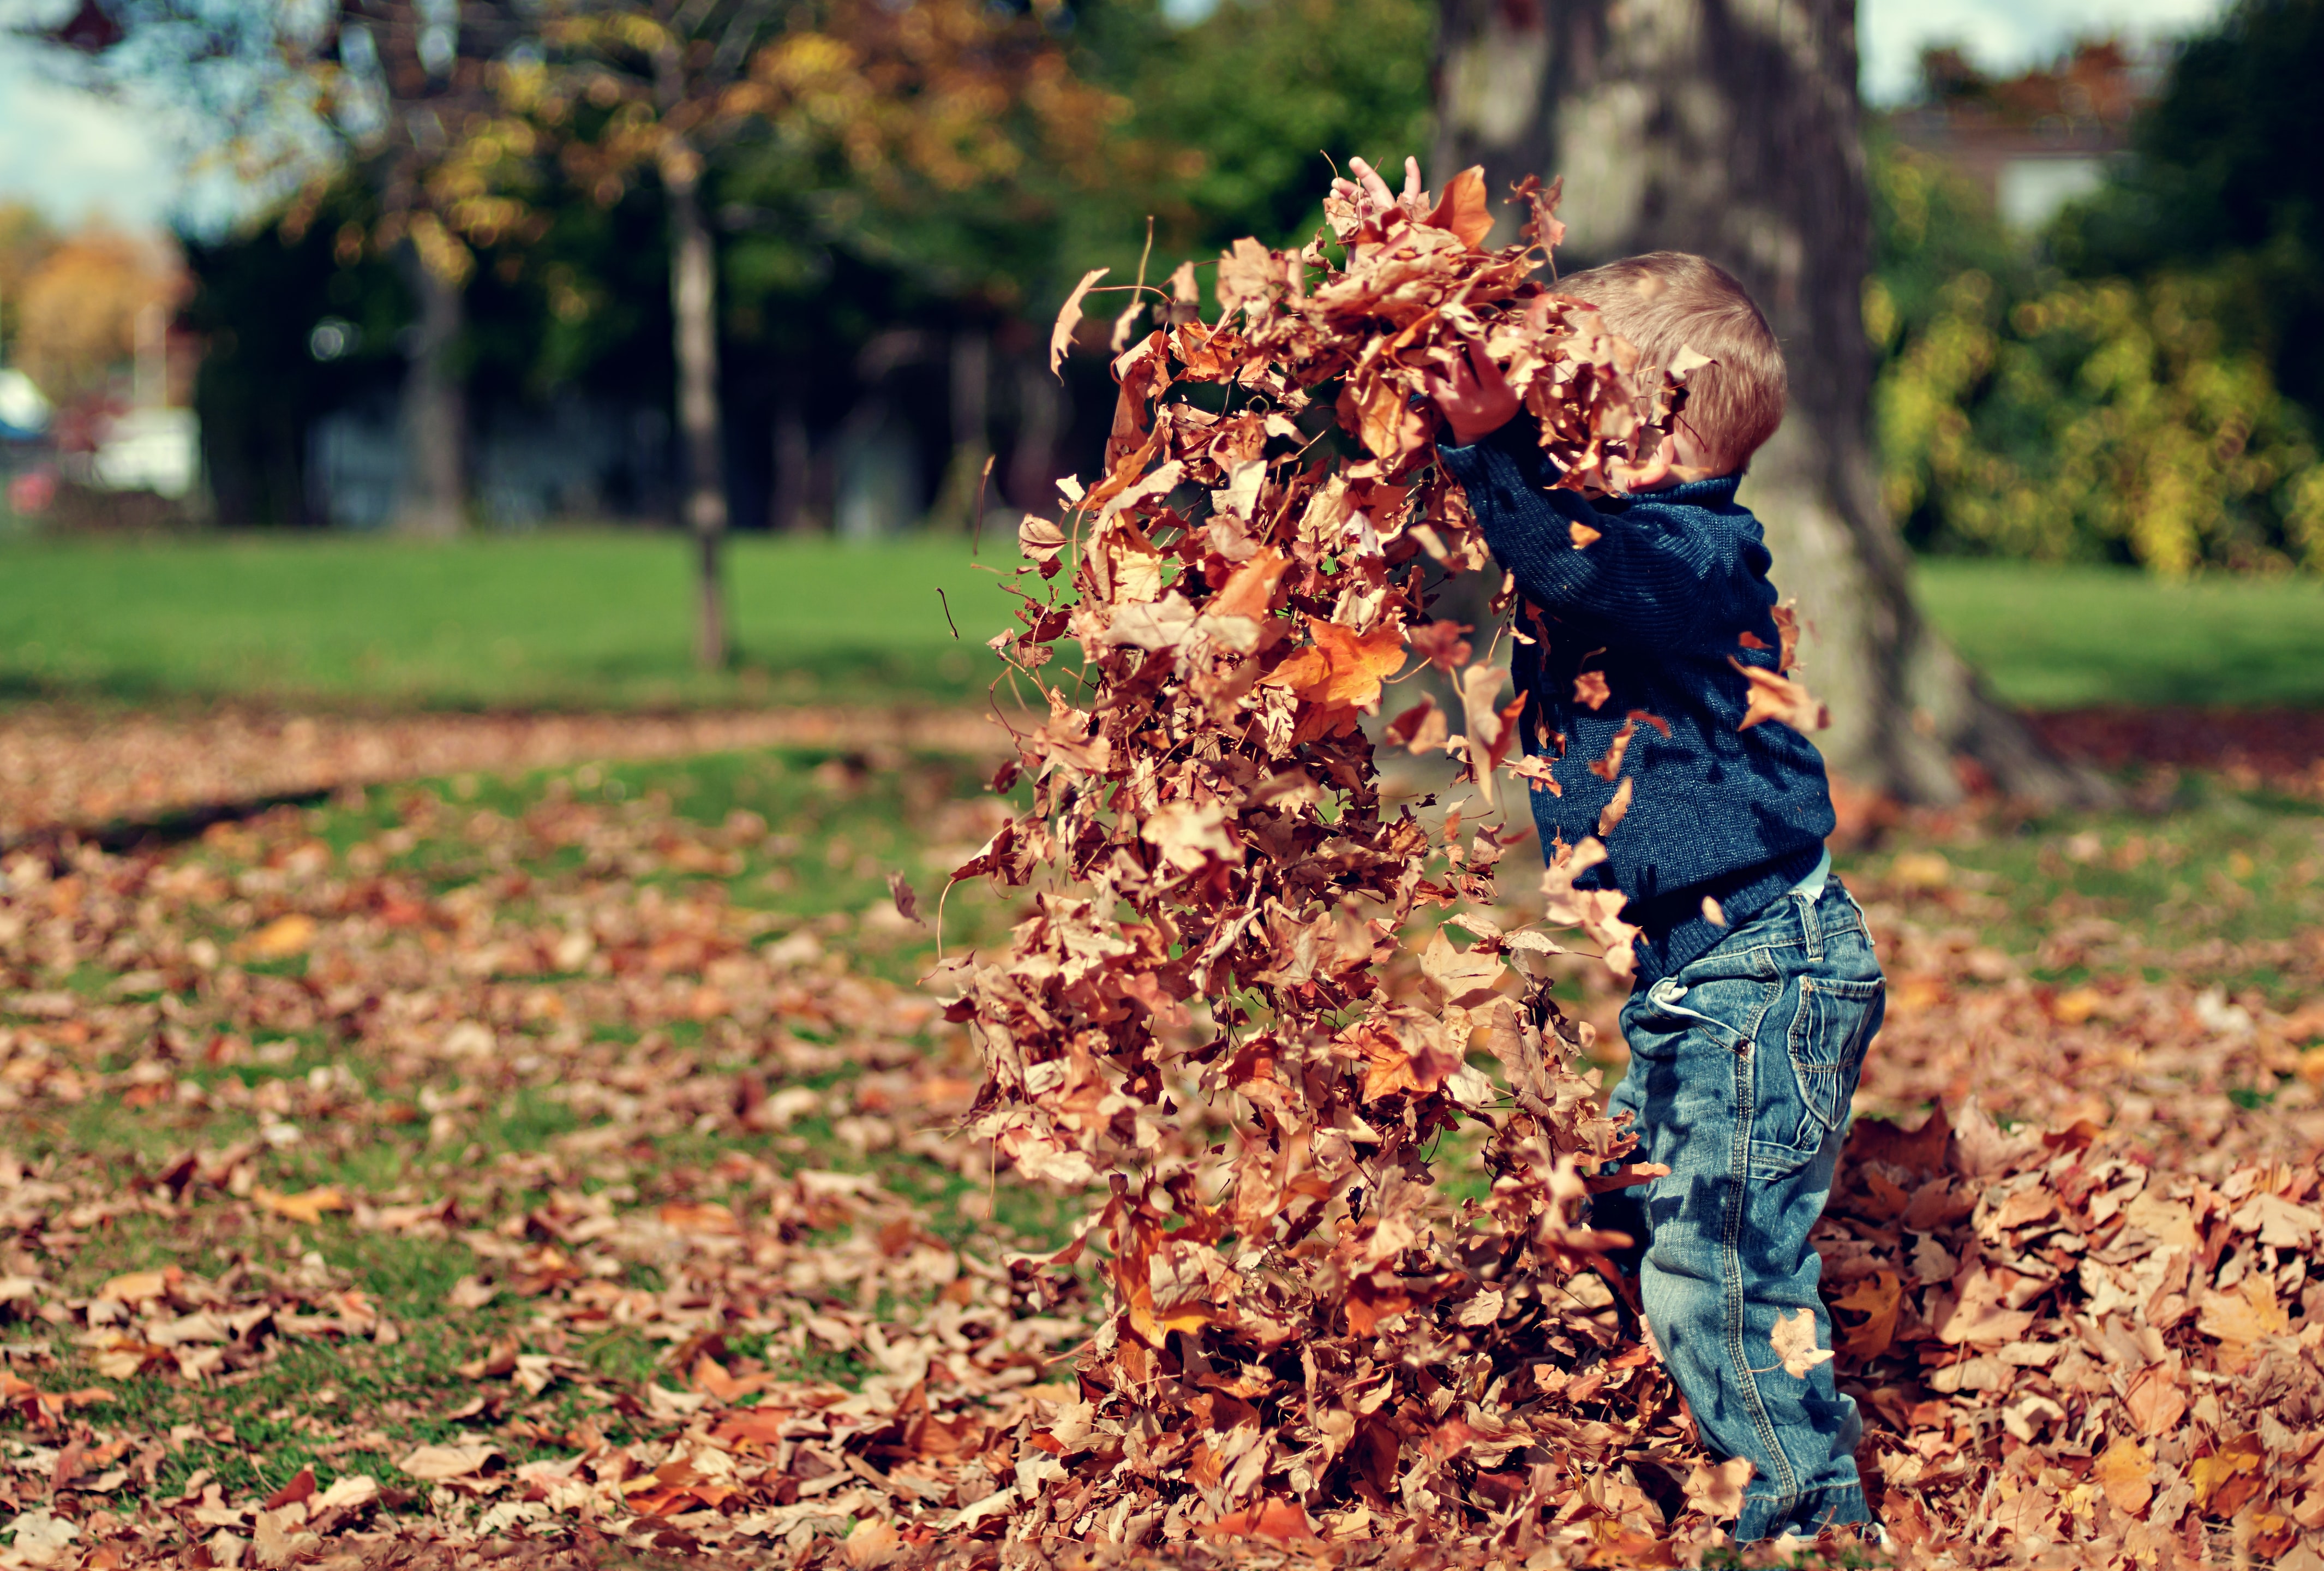 Child outside throwing leaves